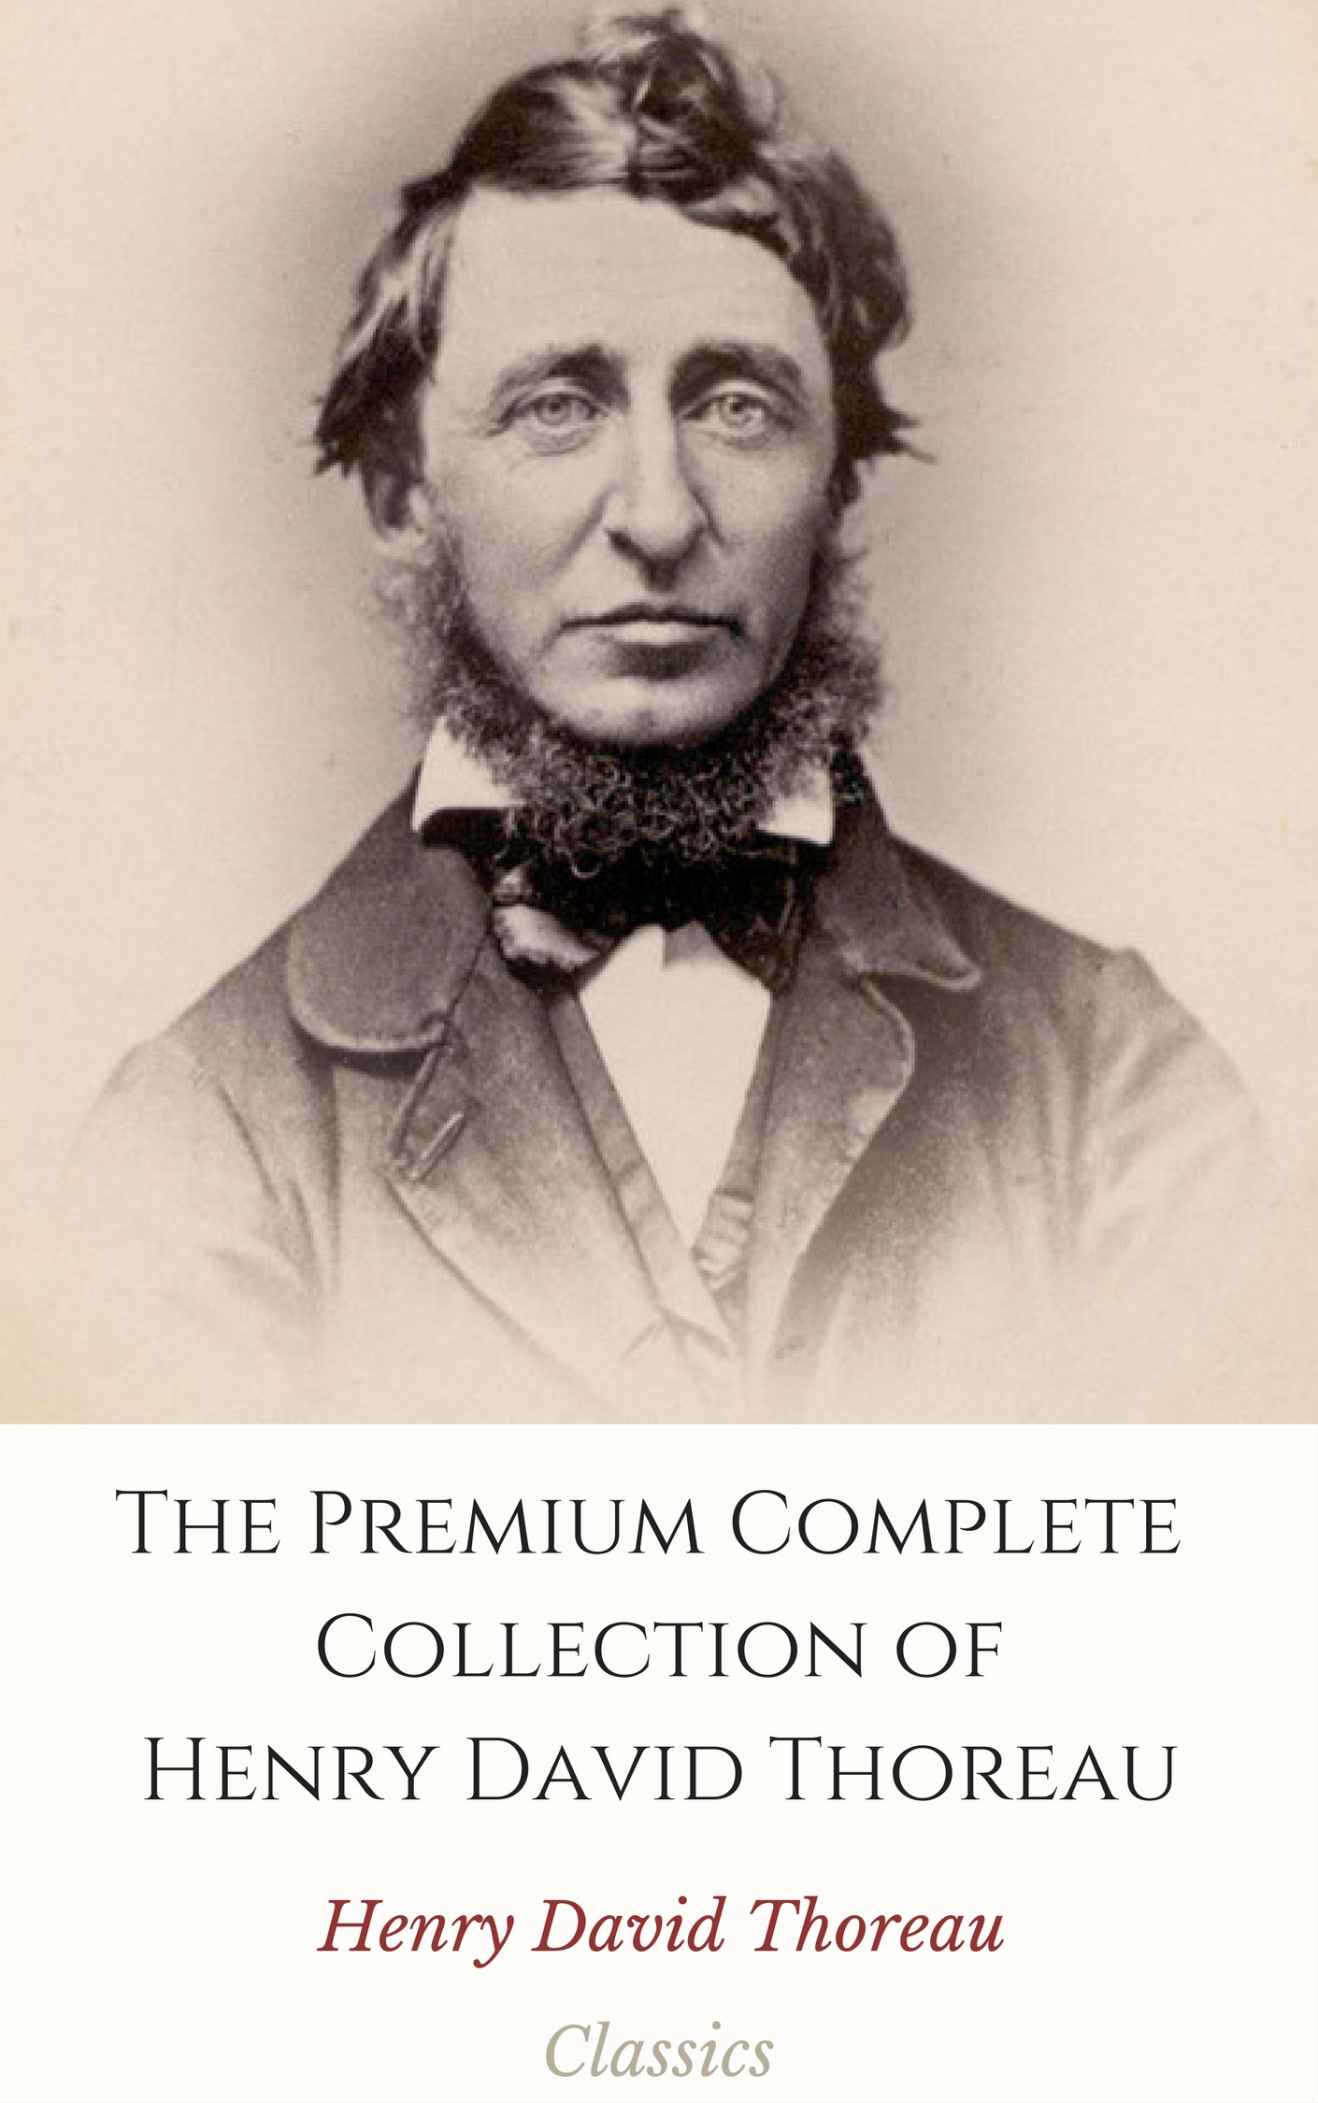 The Collected Works of Henry David Thoreau